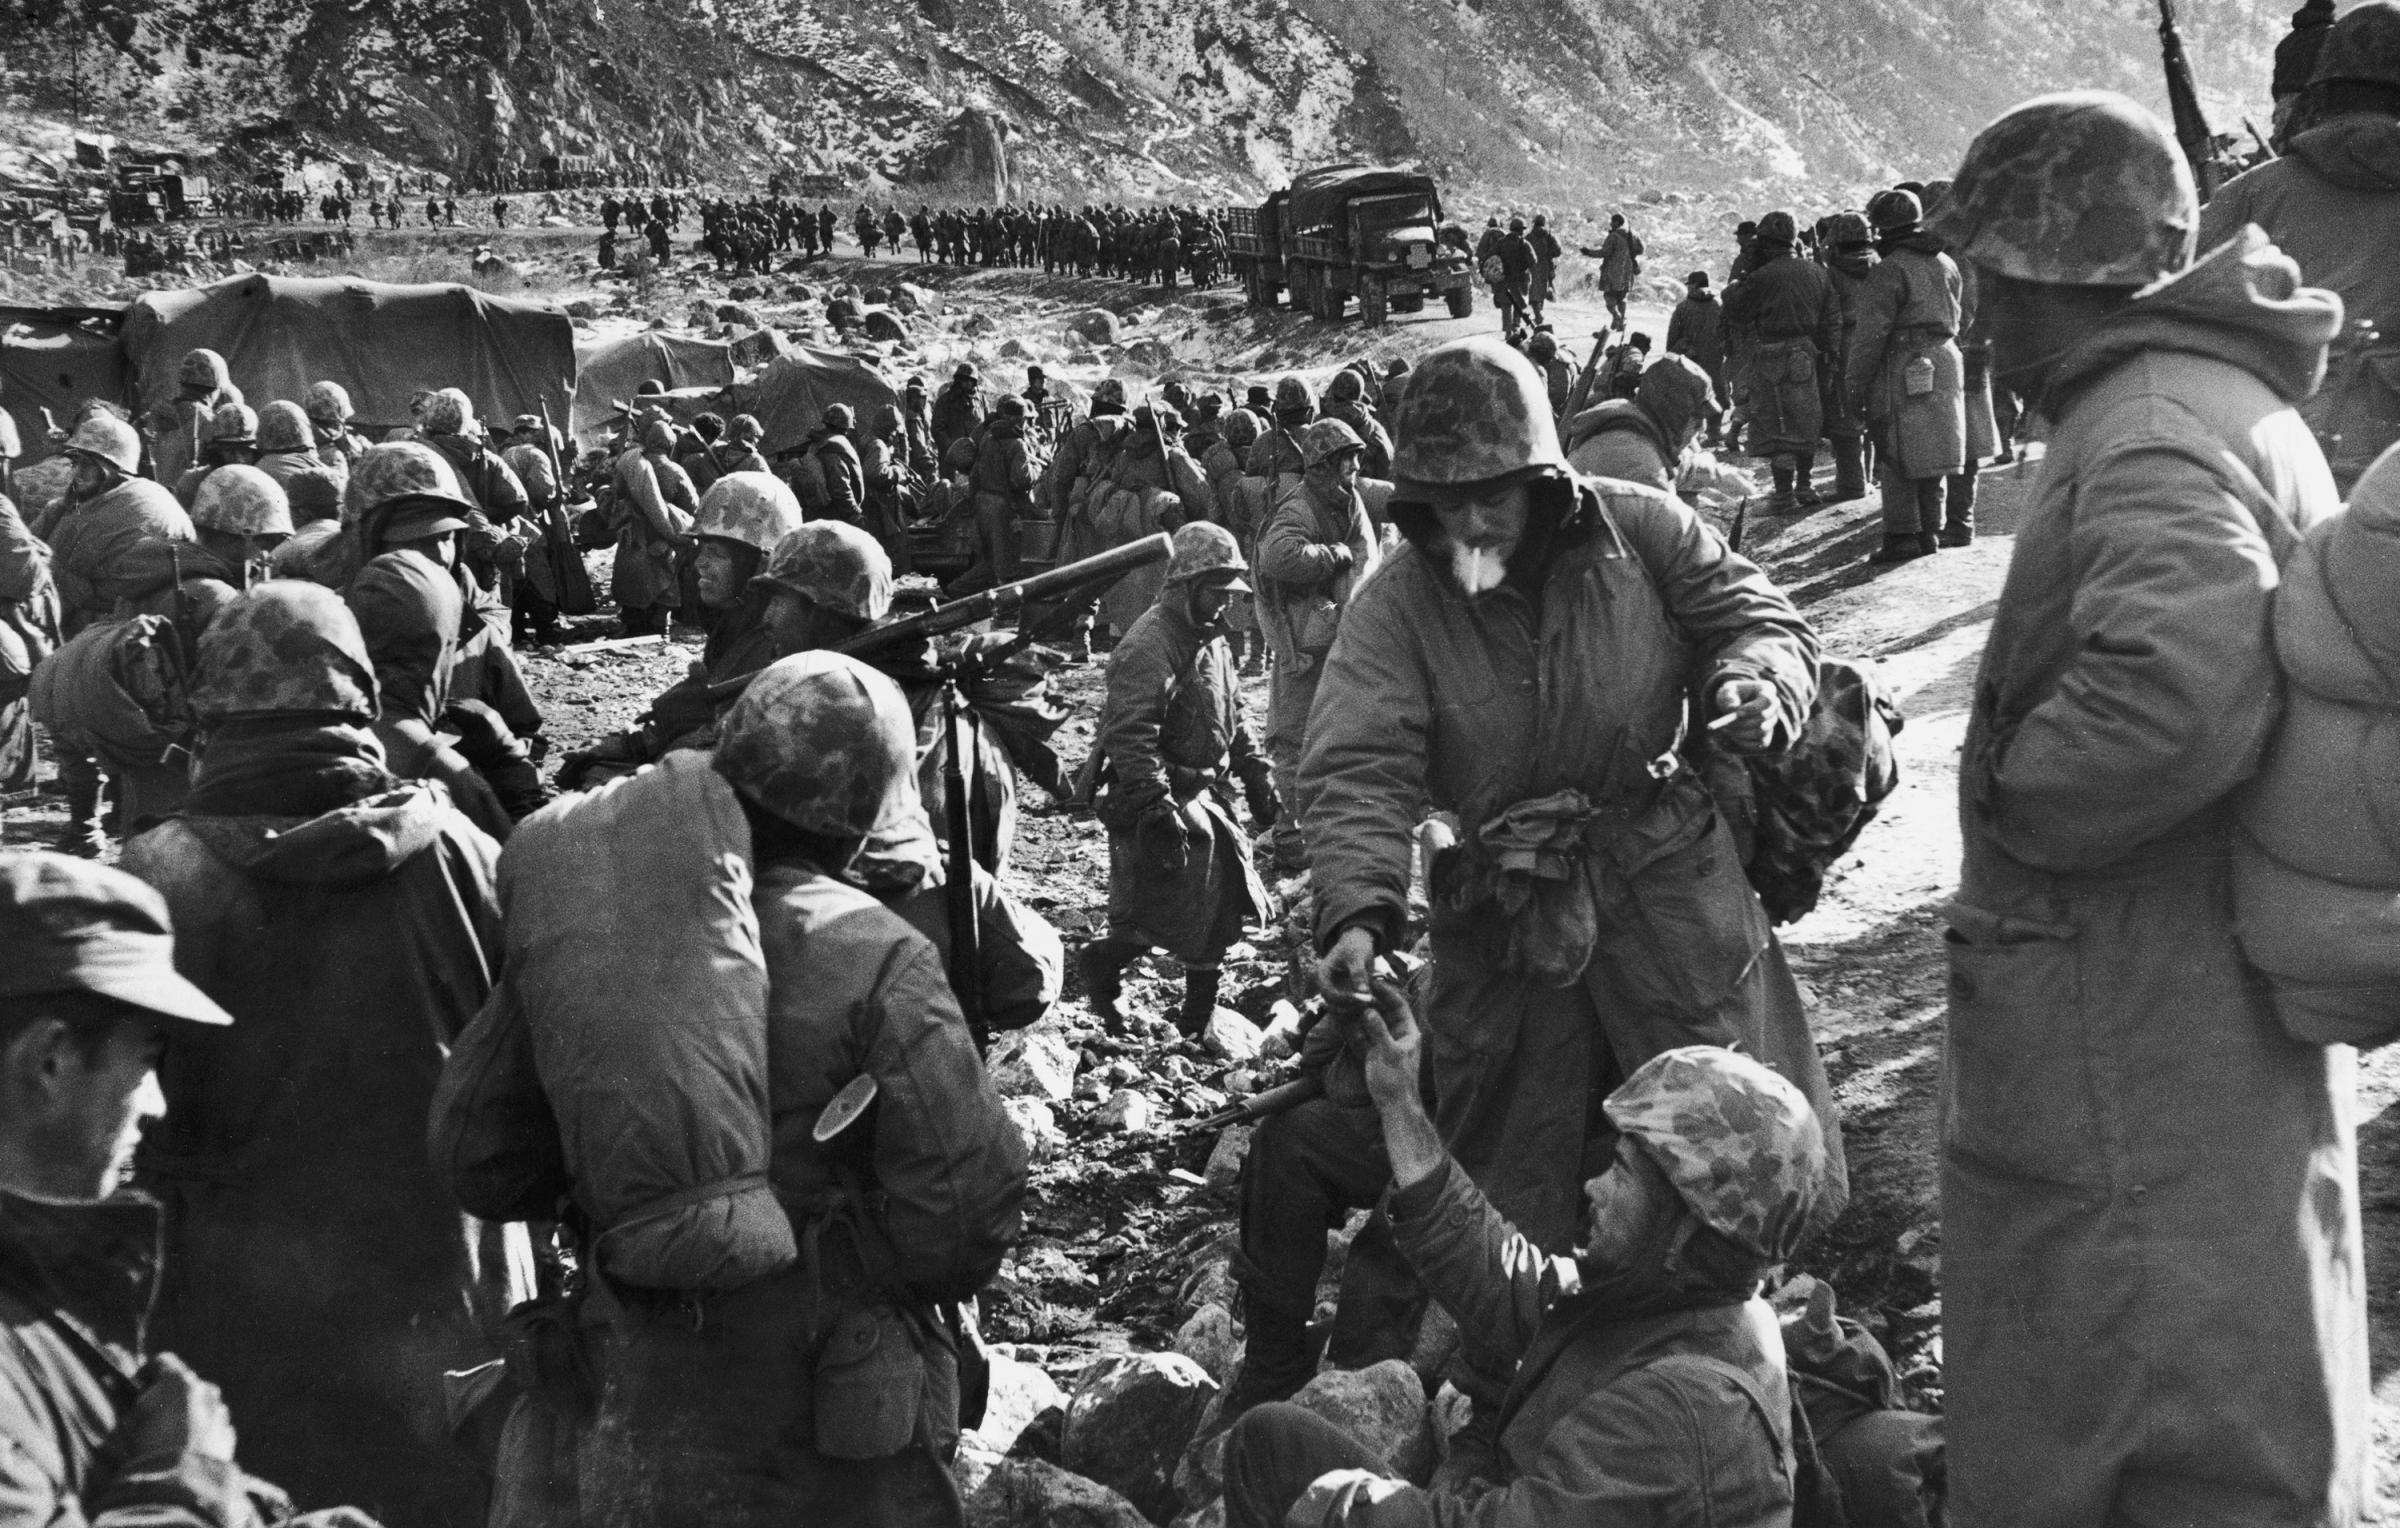 Marines rest after making it through the canyon road known as Nightmare Alley during the retreat from the Chosin Reservoir, December 1950.